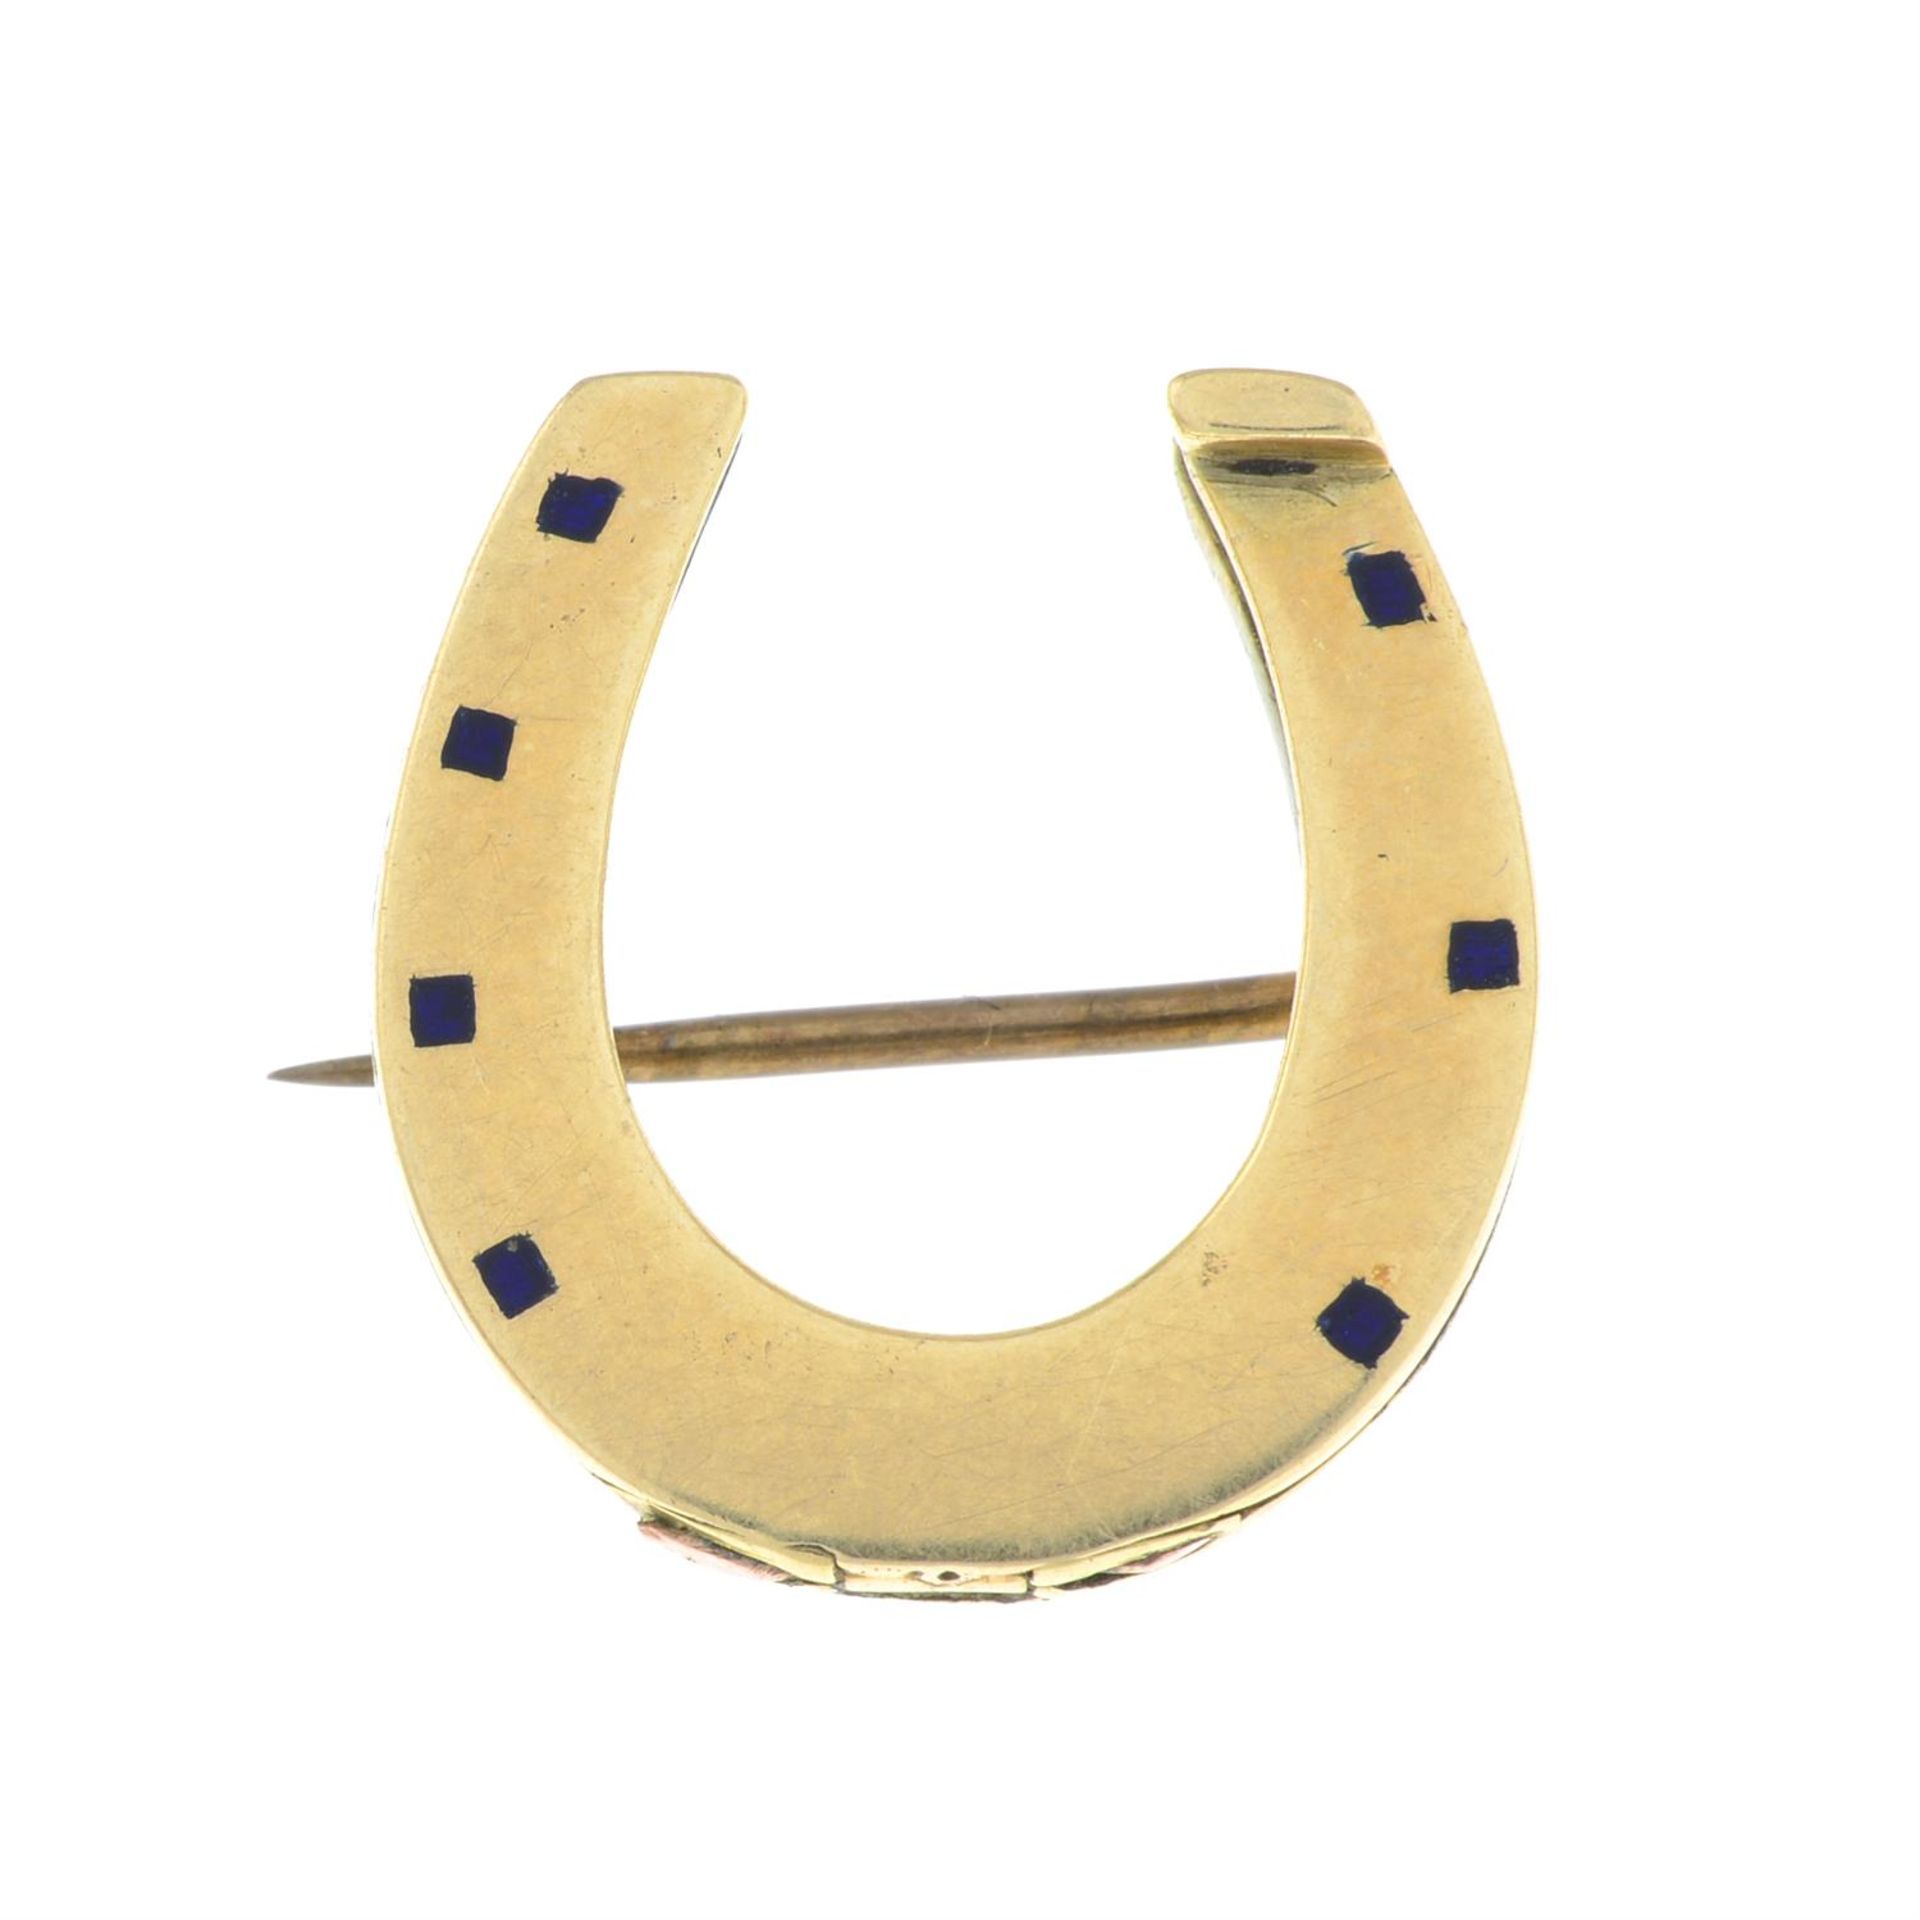 An early 20th century gold and blue enamel horseshoe brooch.